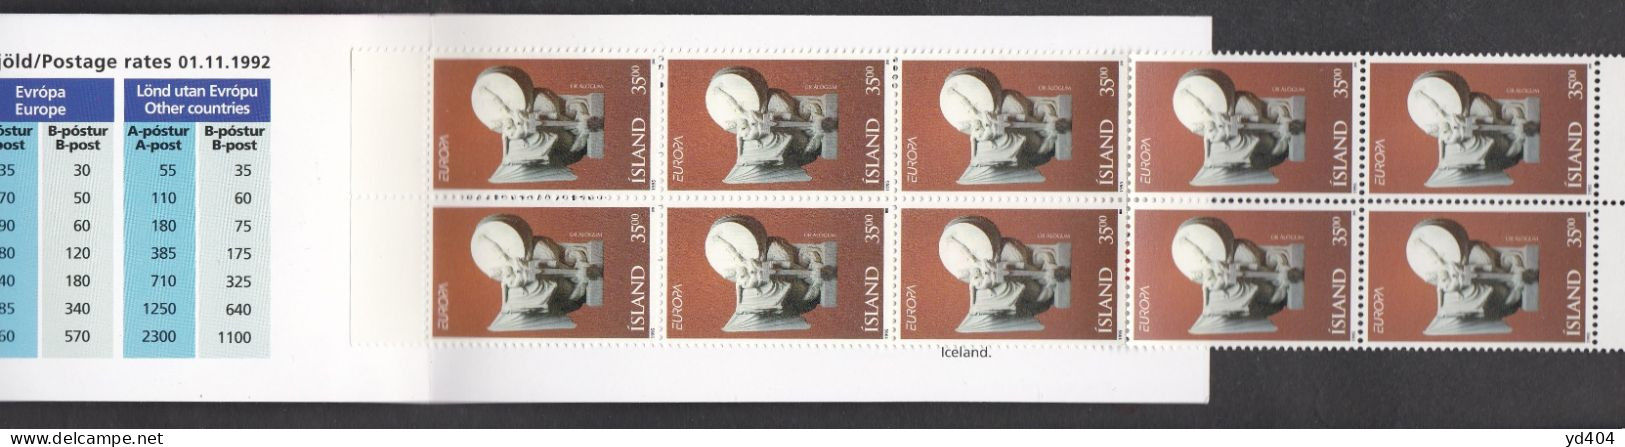 IS668A – ISLANDE - ICELAND - BOOKLETS - 1995 - EUROPA - Y&T # C777 MNH 15 € - Booklets